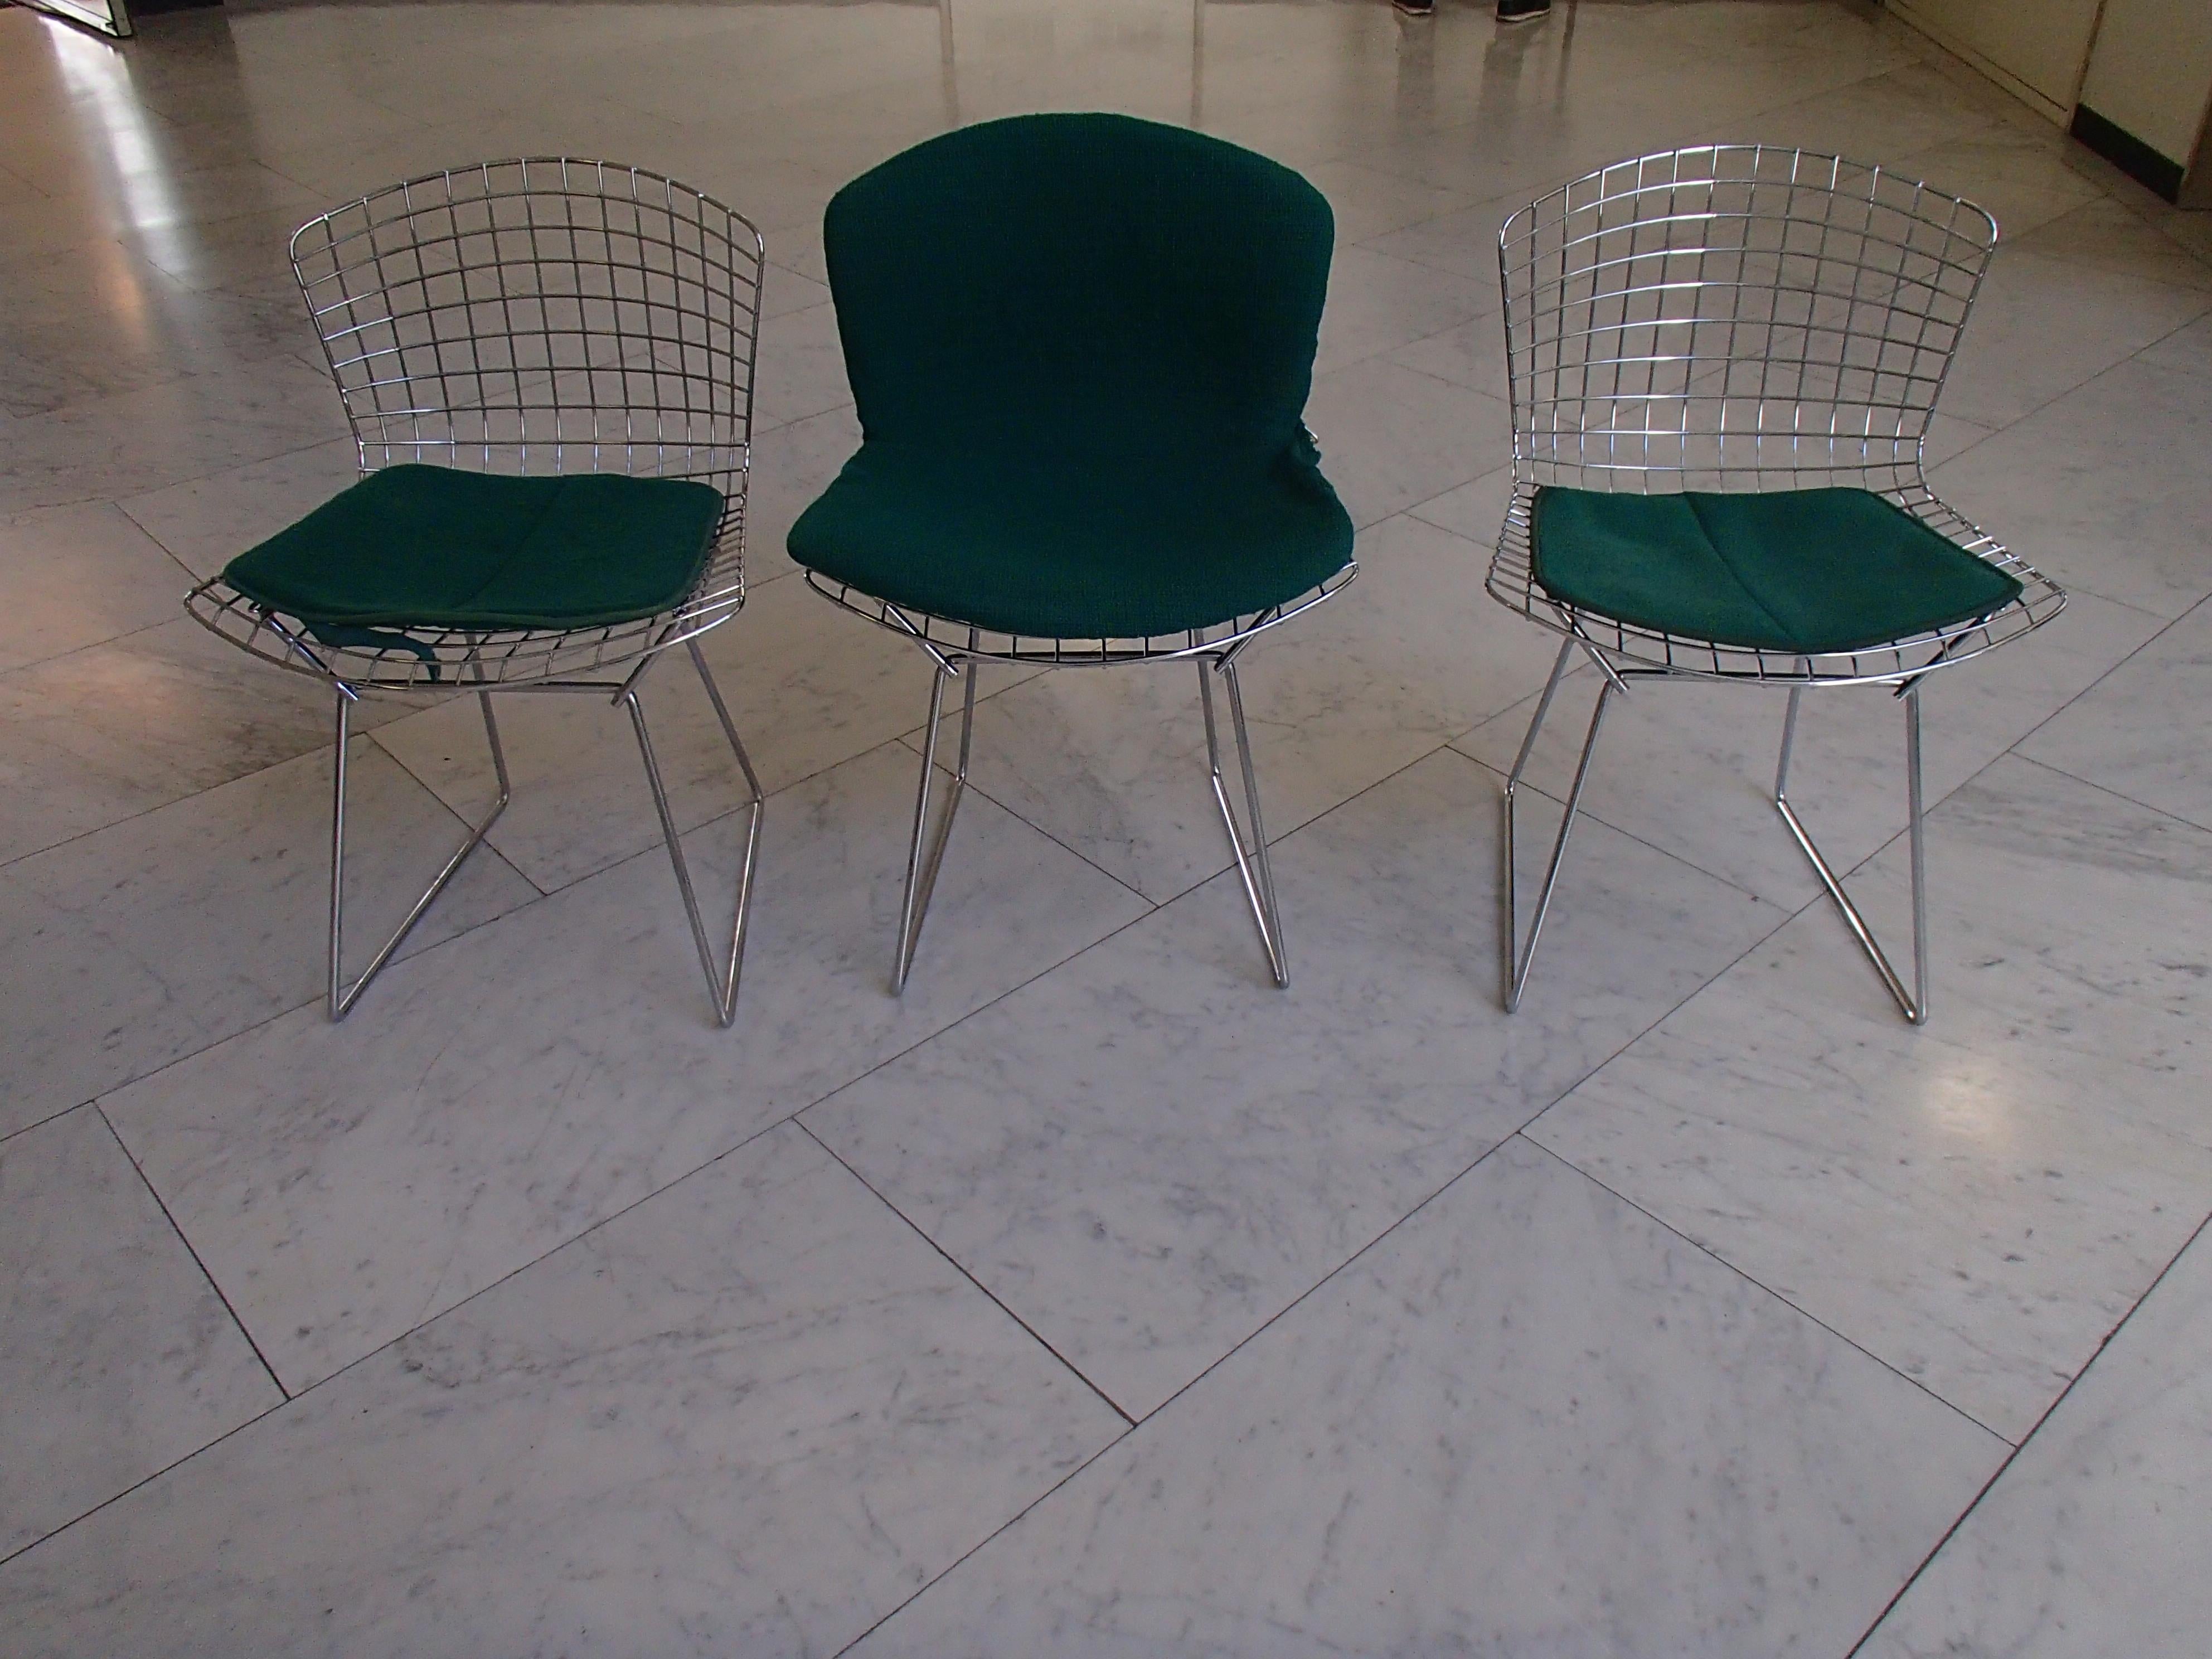 Late 20th Century 3 Bertoia Chrome Chairs with Green Cushions